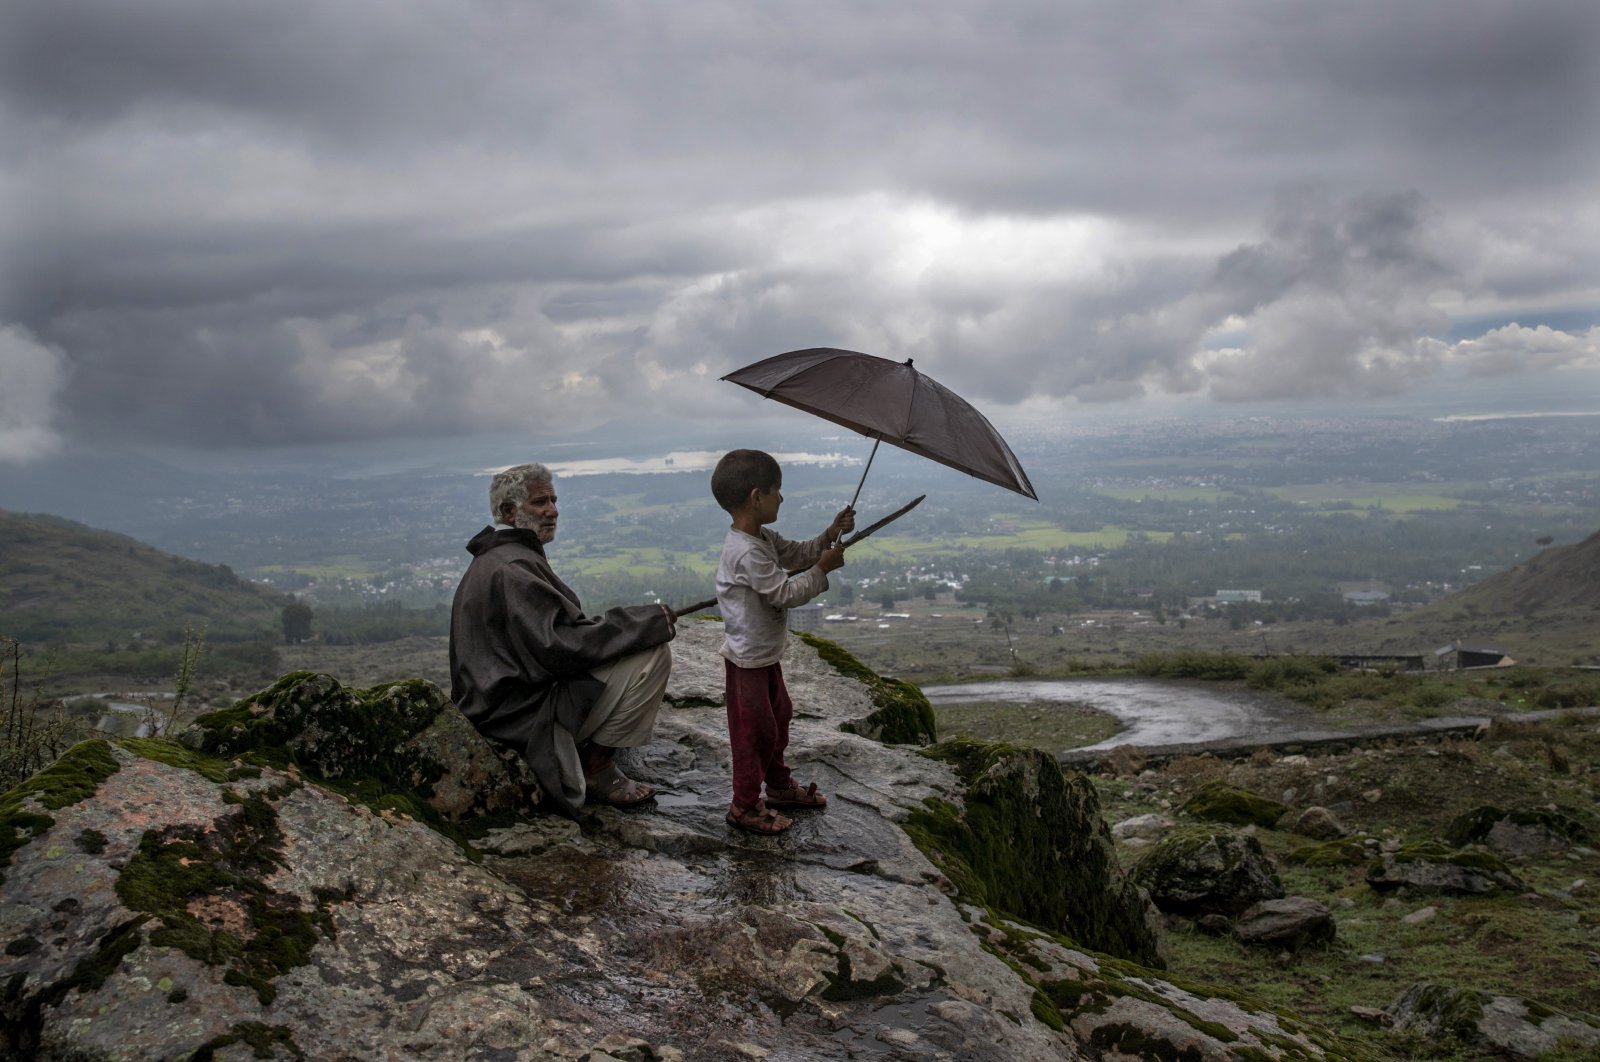 A Kashmiri villager with his grandson keeps watch over their cattle from a hillock on the outskirts of Srinagar, Indian-controlled Kashmir, Aug. 31, 2020. (AP Photo)